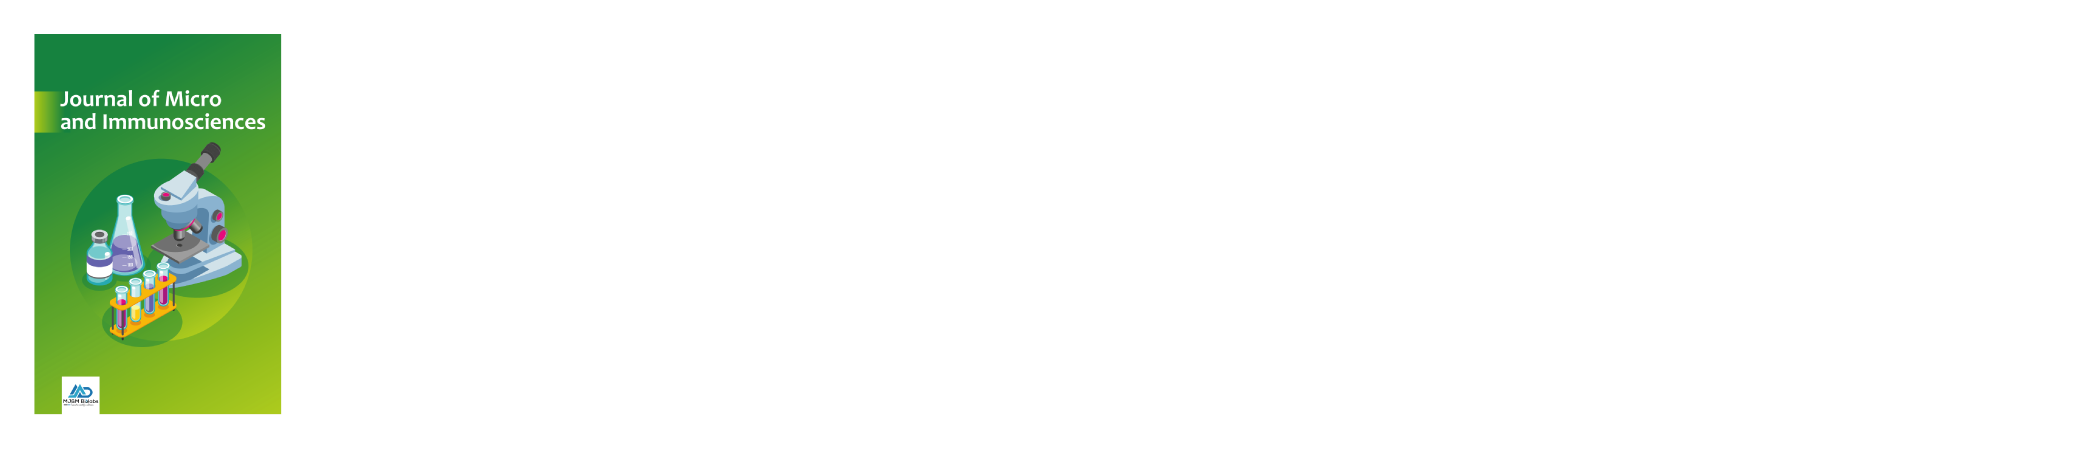 Journal of Micro and Immunosciences